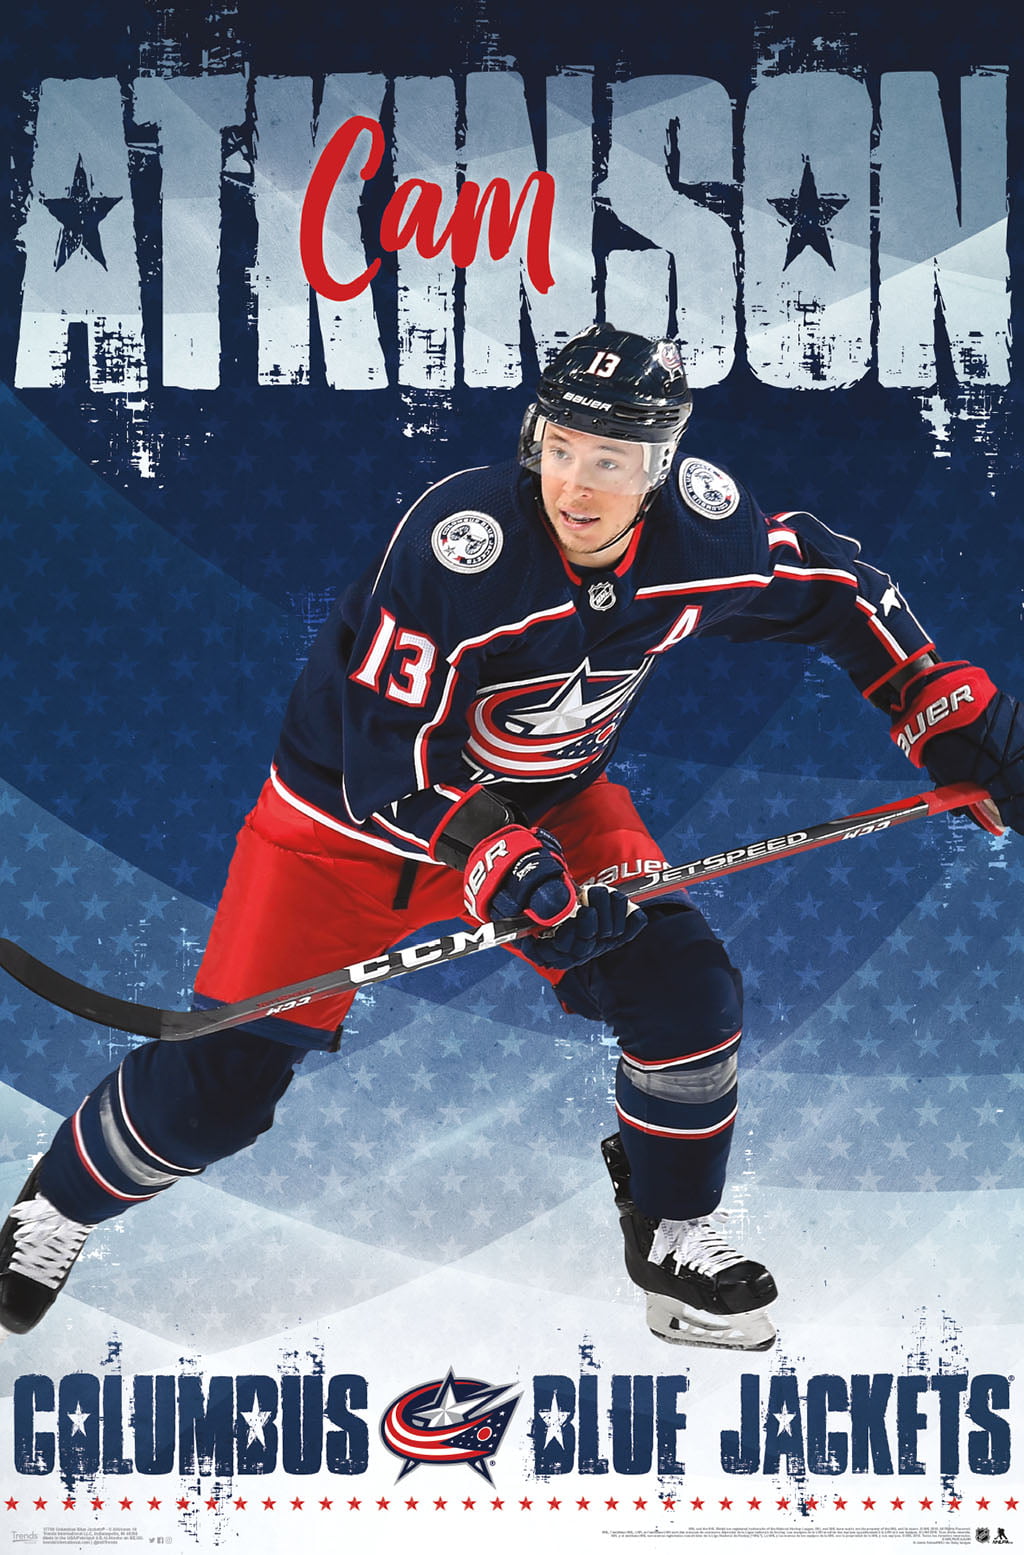 Cam Atkinson Hockey Paper Poster Flyers